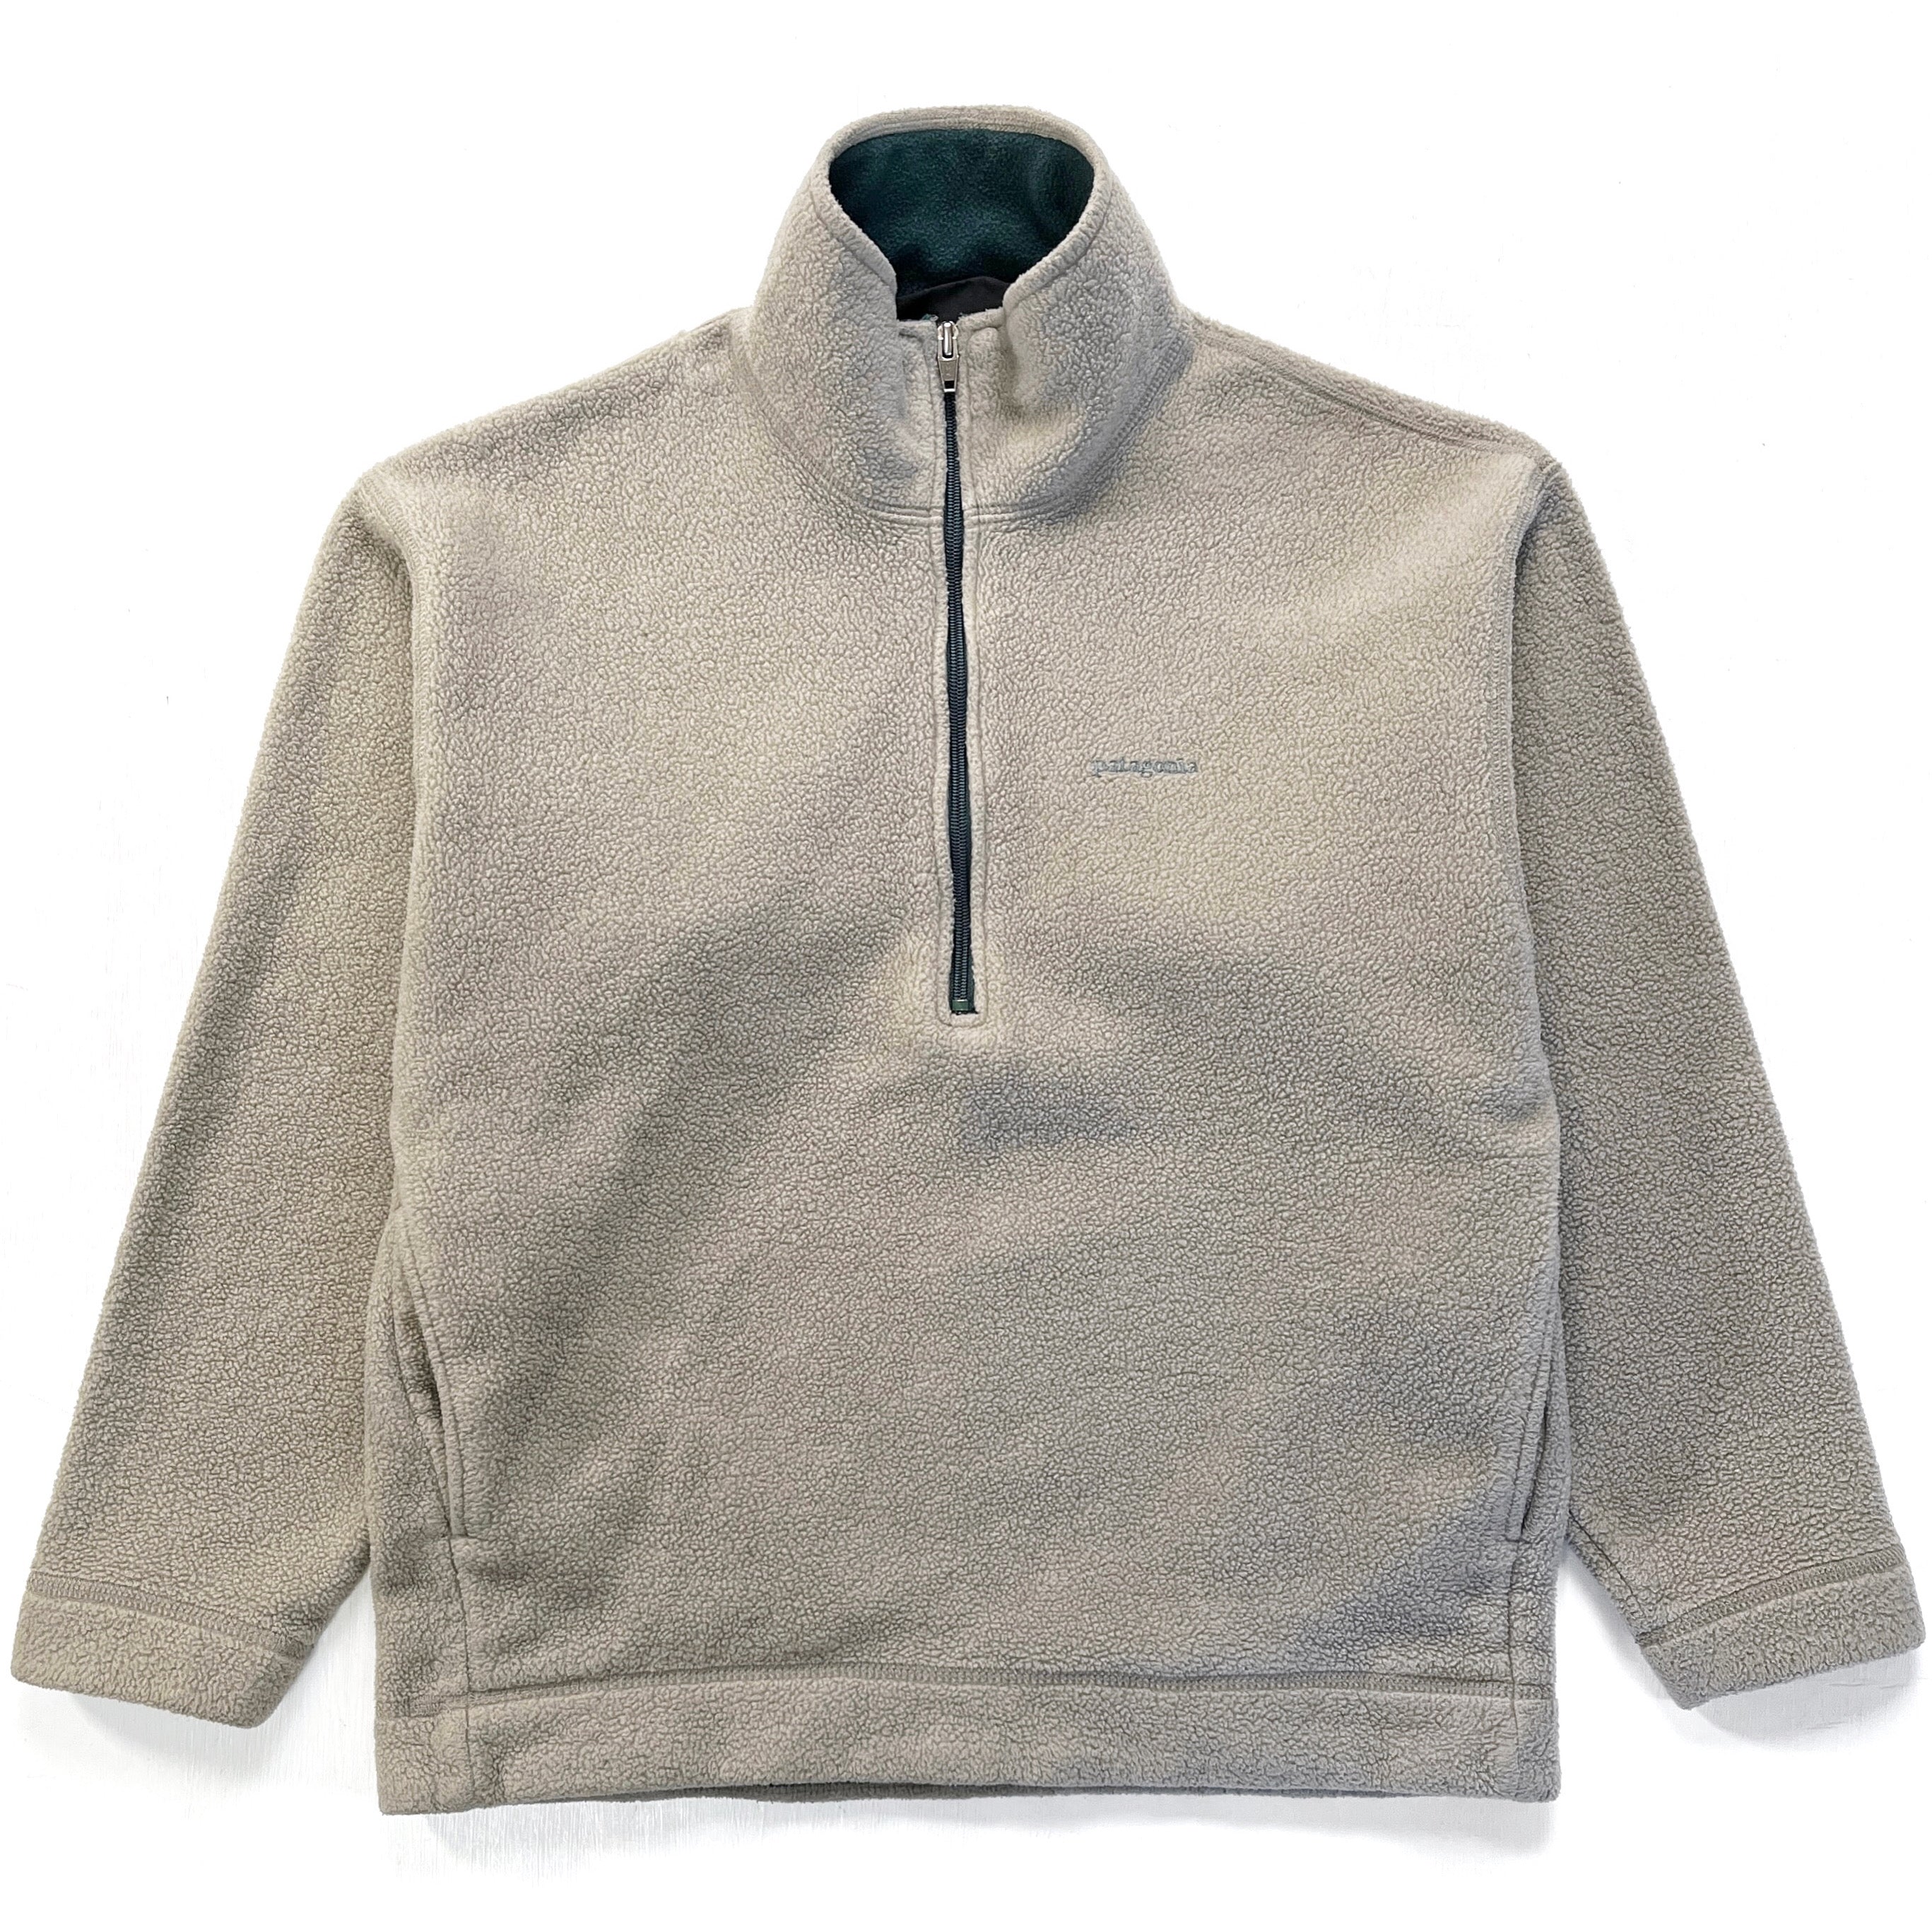 1995 Patagonia Made In The U.S.A. Synchilla Sweater, Light Khaki (S)